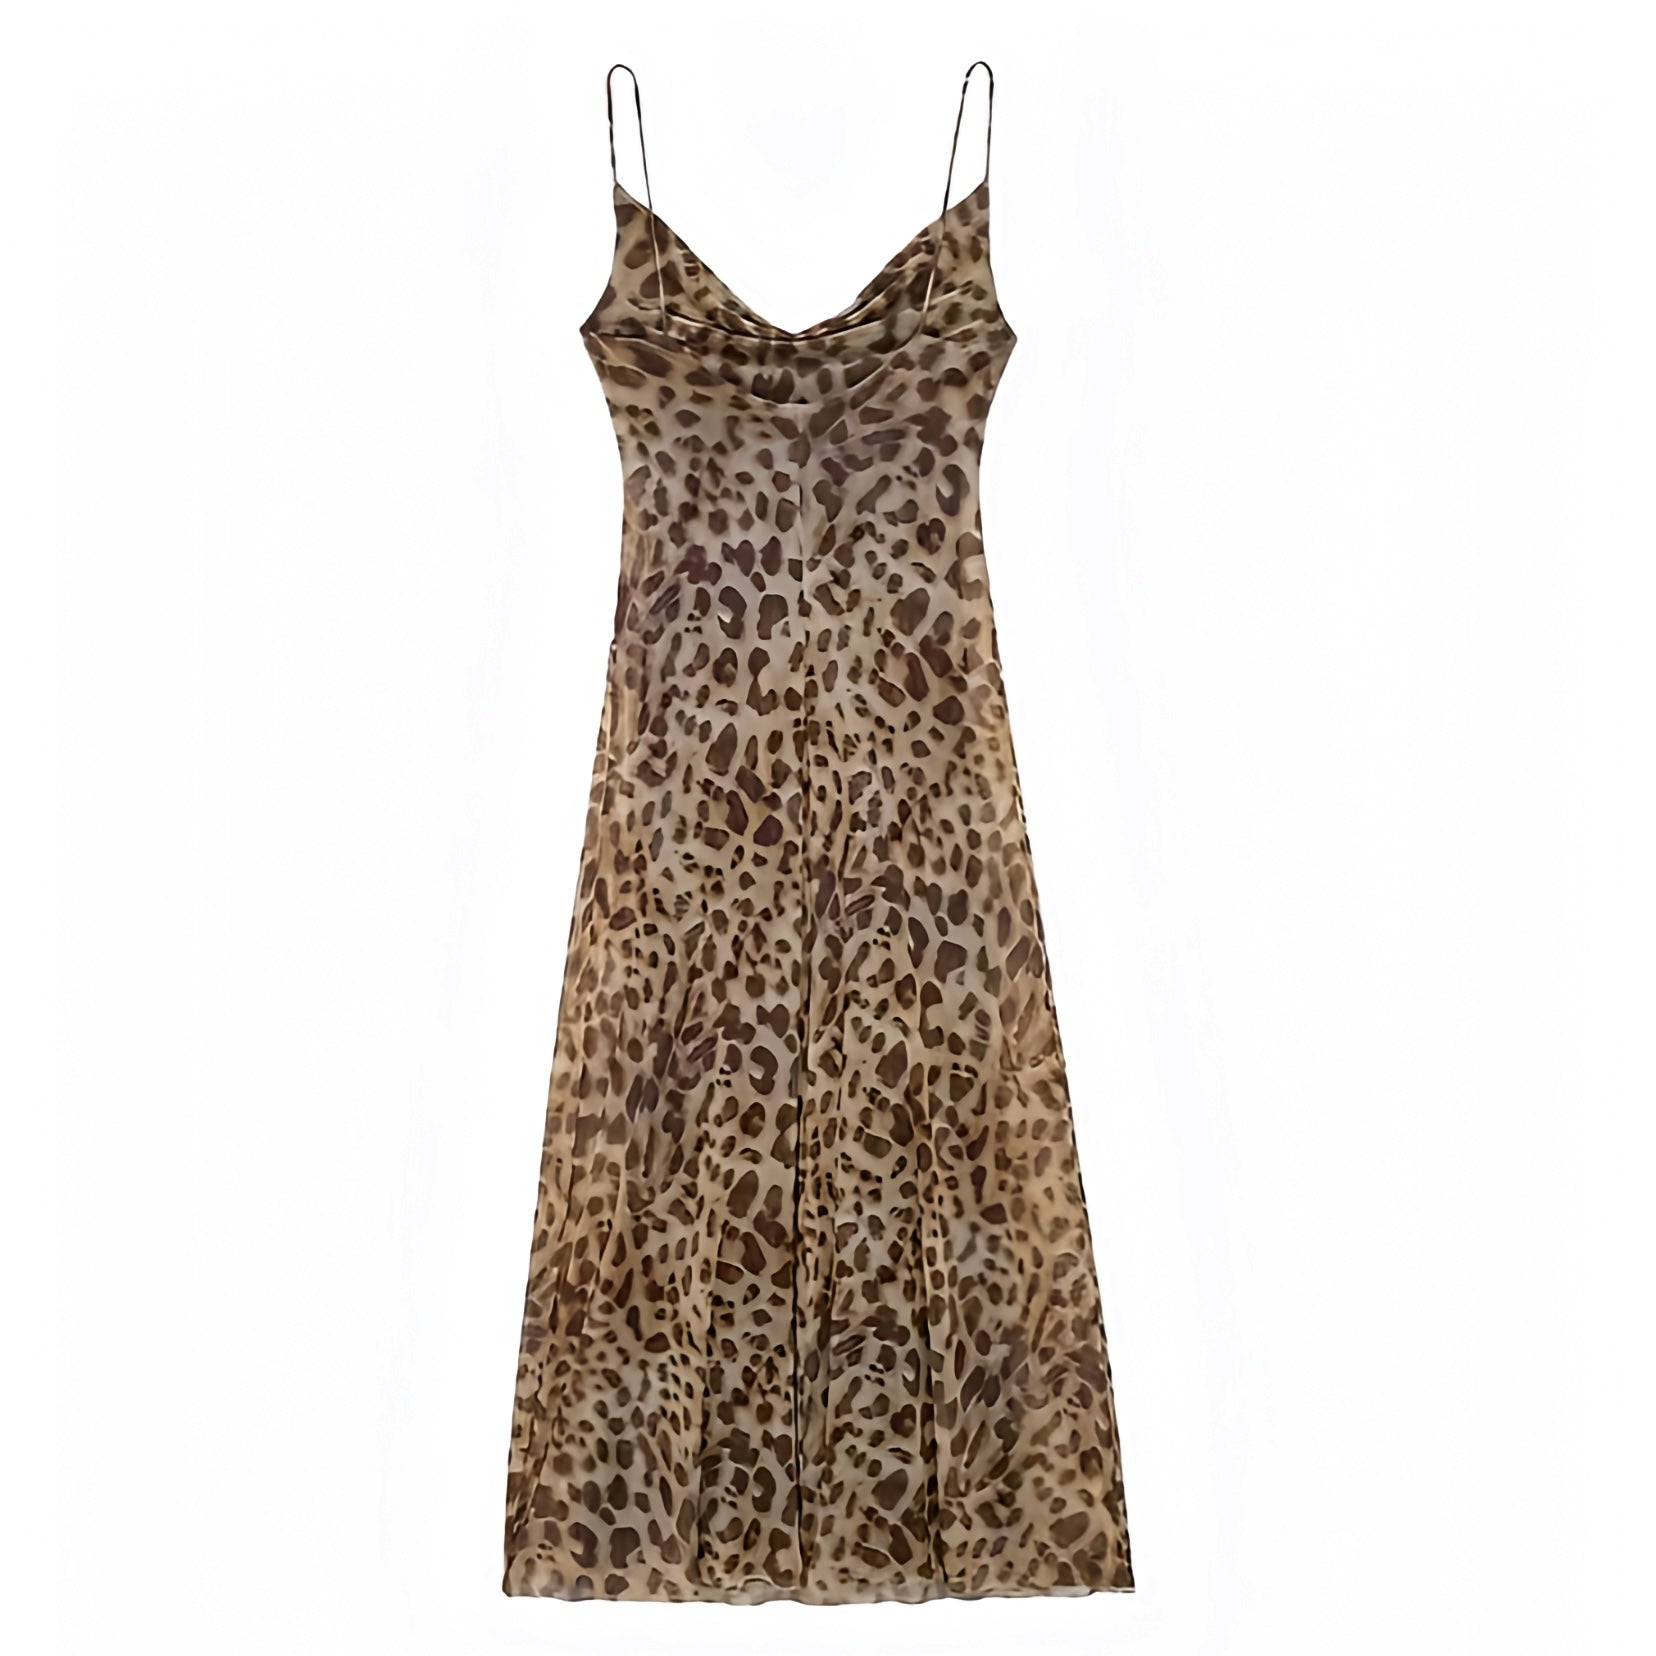 leopard-cheetah-animal-print-patterned-brown-black-multi-color-slim-fit-bodycon-silhouette-mesh-translucent-ruched-draped-scoop-neck-spaghetti-strap-sleeveless-backless-open-back-flowy-slip-midi-long-maxi-dress-evening-gown-women-ladies-chic-trendy-spring-2024-summer-elegant-casual-semi-formal-classy-feminine-prom-cocktail-party-sexy-club-wear-y2k-exotic-tropical-vacation-sundress-zara-free-people-princess-polly-revolve-dupe